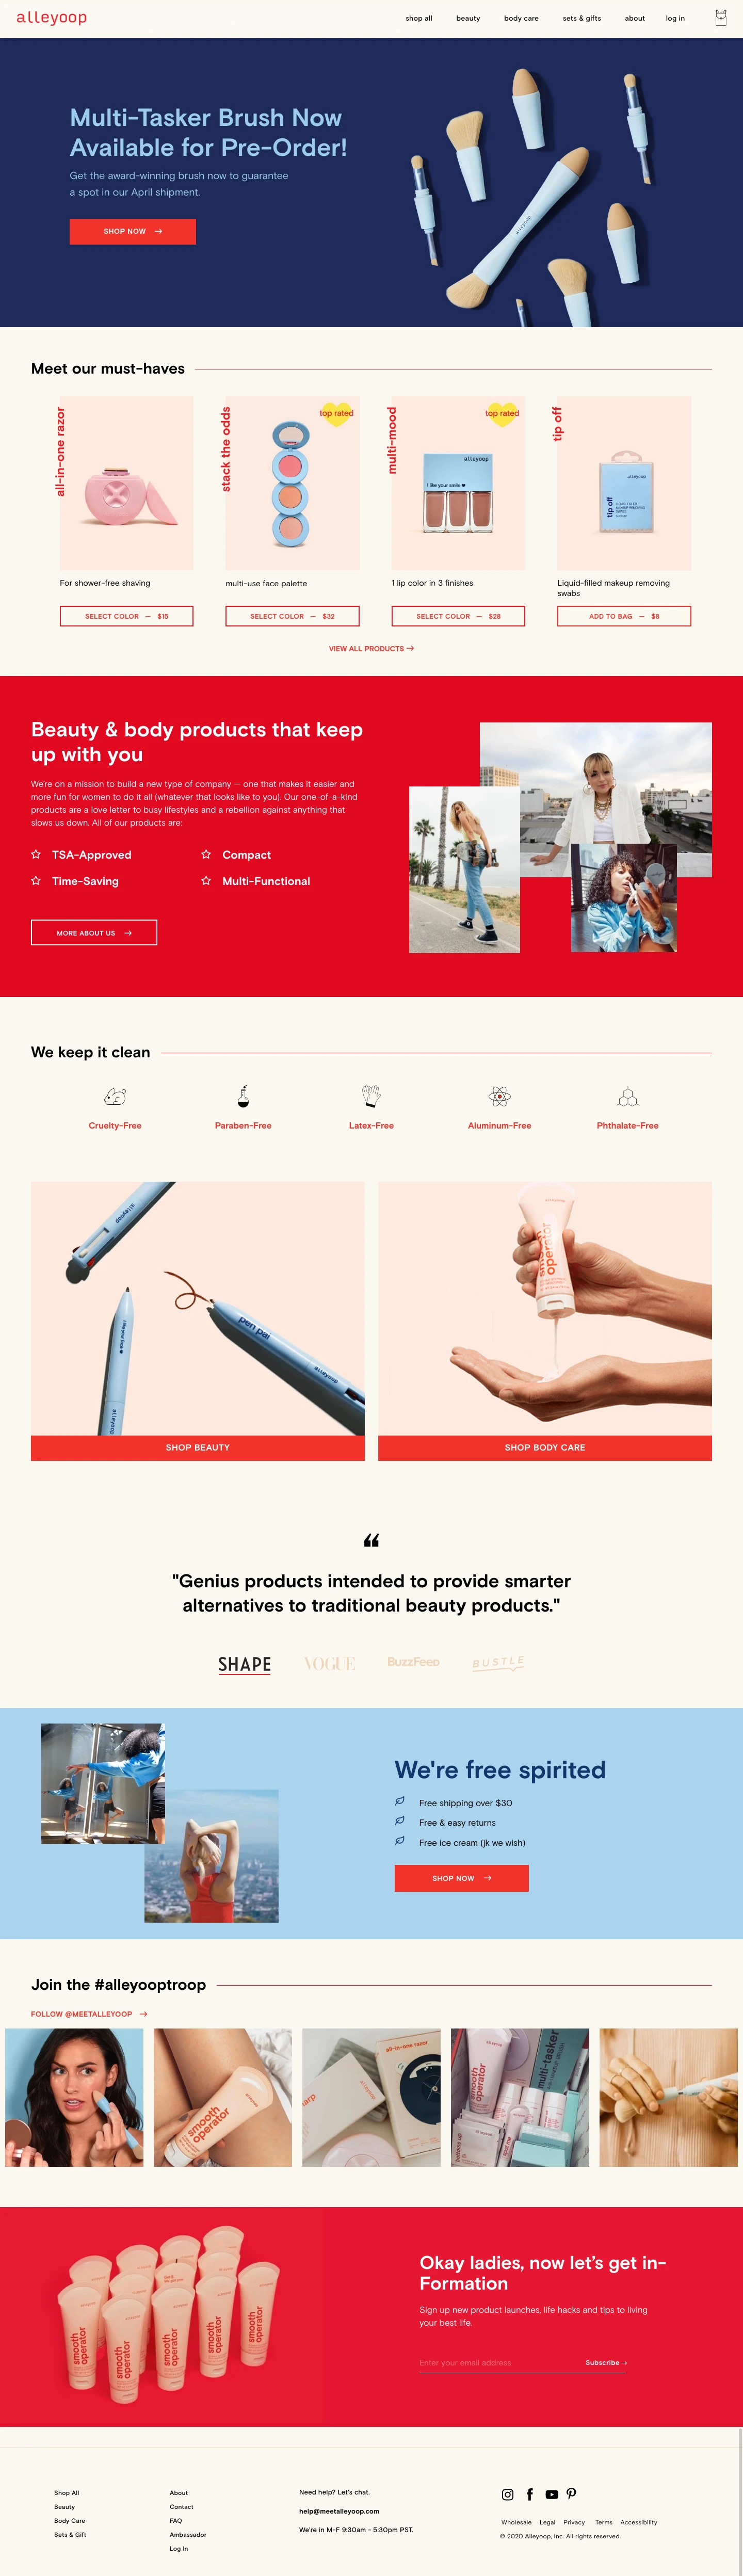 Alleyoop Landing Page Example: Redefining beauty & body care to keep up with you.